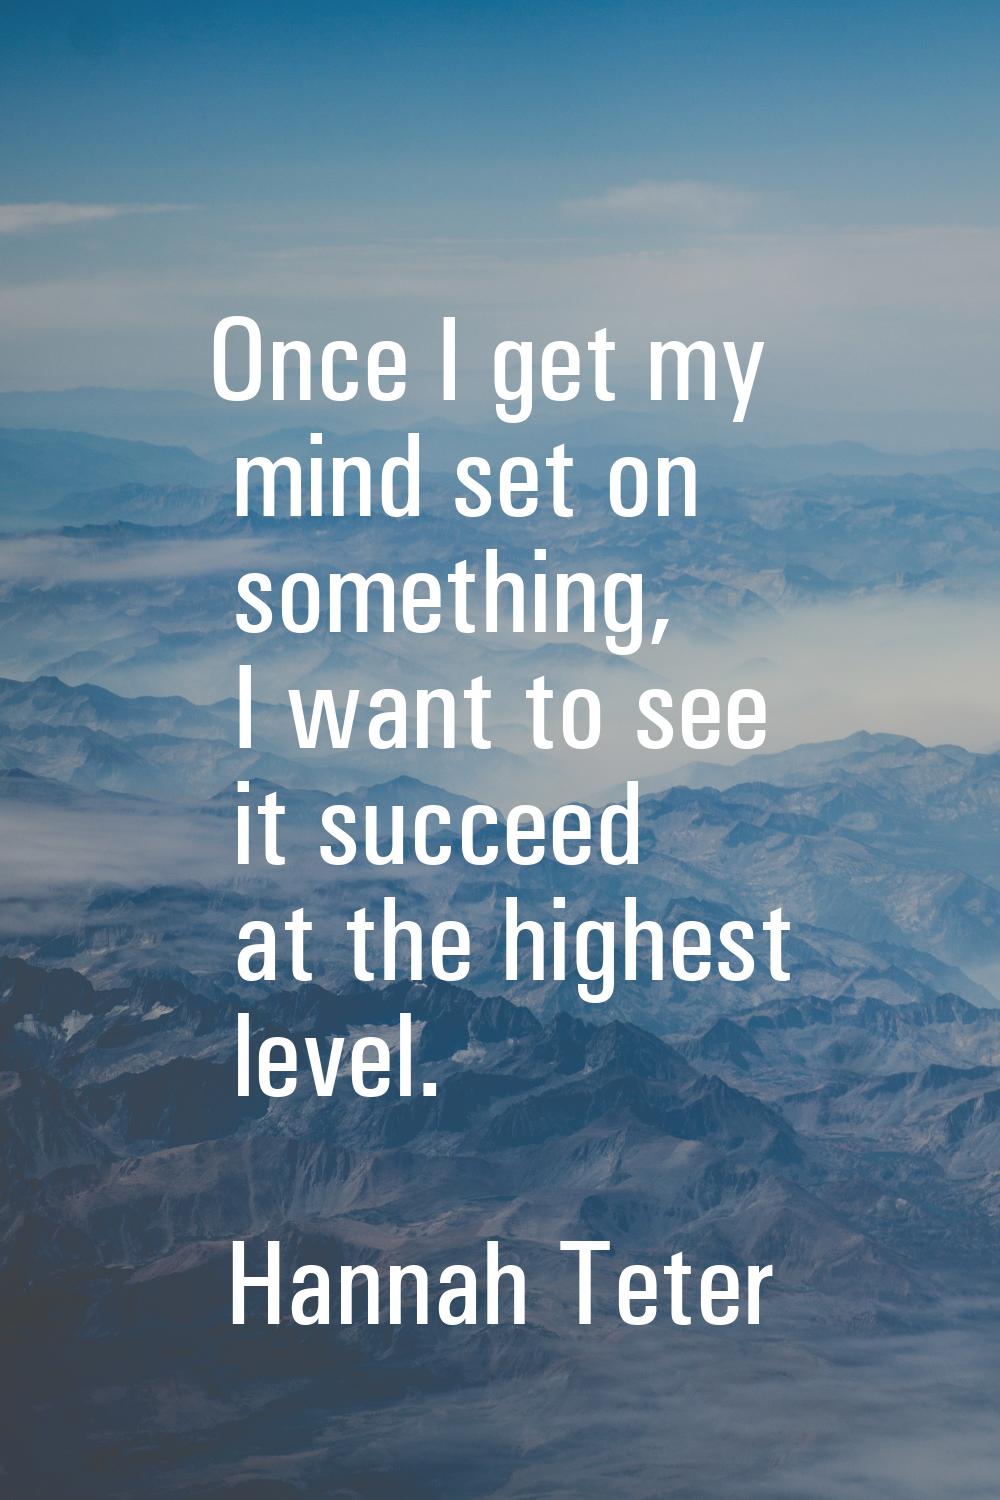 Once I get my mind set on something, I want to see it succeed at the highest level.